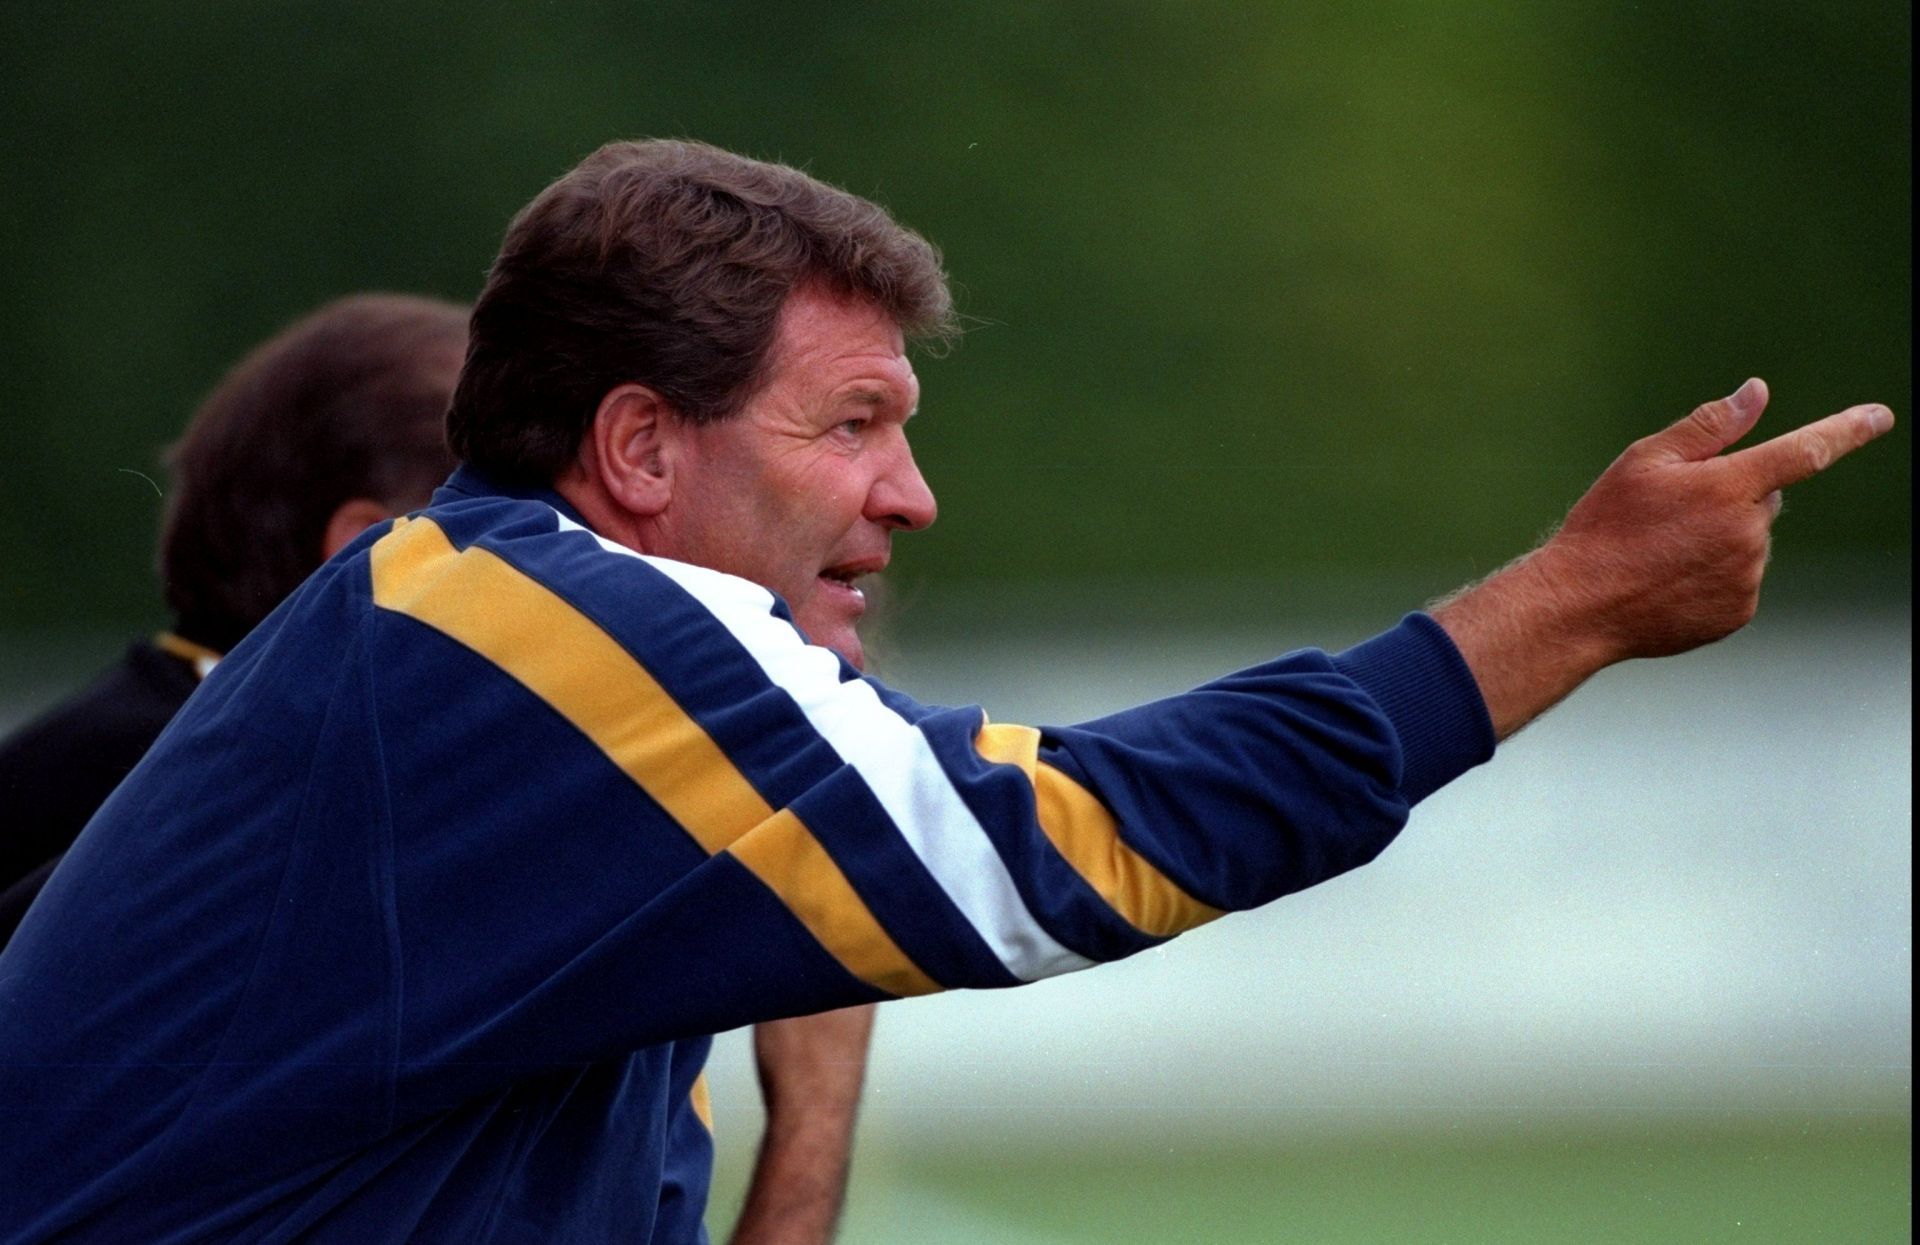 John Toshack shouting instructions to Madrid players during a friendly match in 1999.